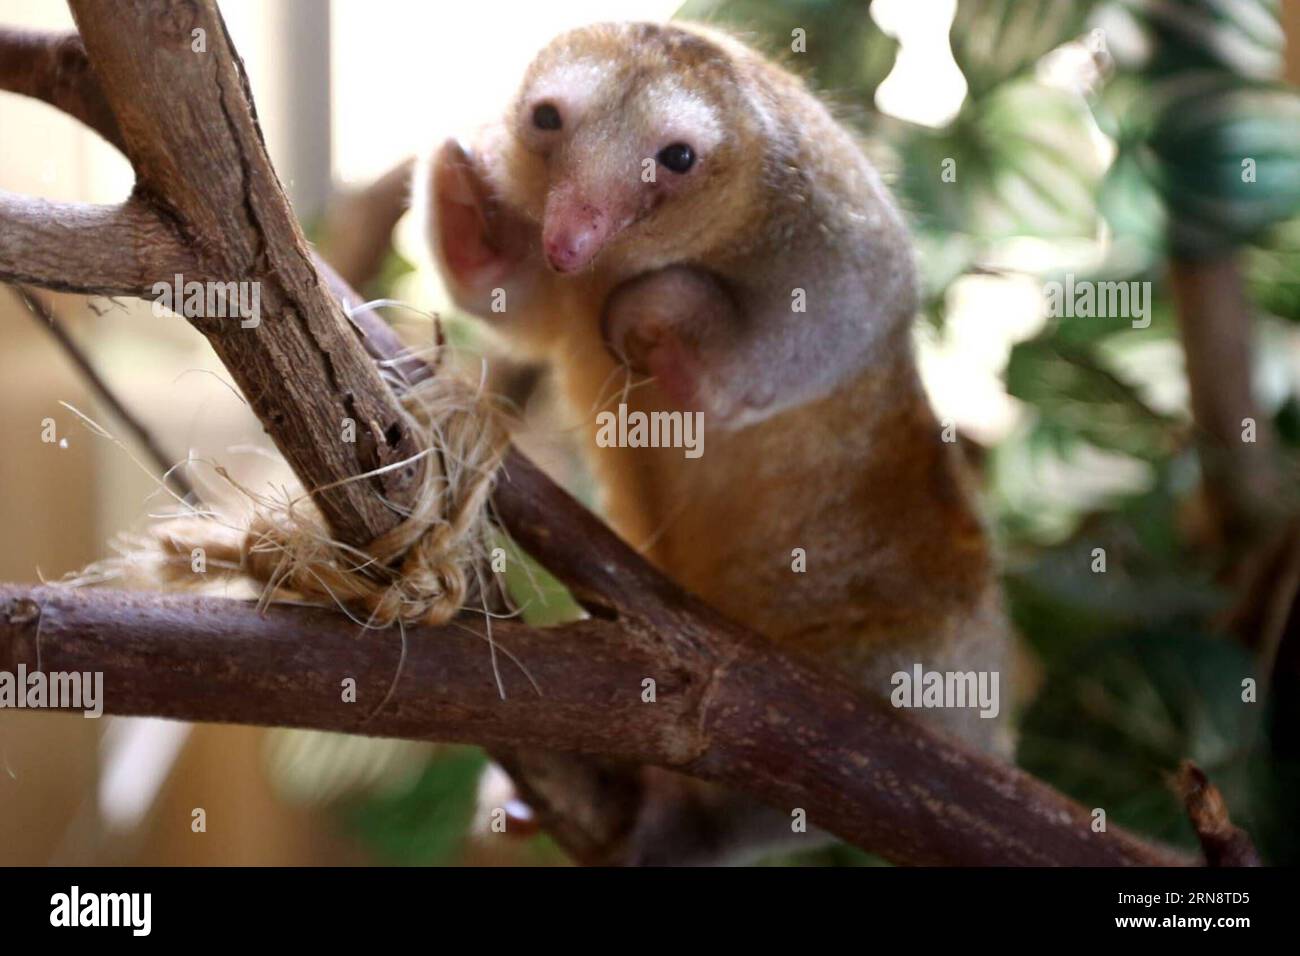 A silky anteater (Cyclopes didactylus) is on a branch at Huachipa Zoological Park, in the district of Ate-Vitarte, Lima department, Peru, on Nov. 4, 2015. Juan Carlos Guzman Negrini/ANDINA) (jp) (ah) PERU-ATE VITARTE-ENVIRONMENT-FAUNA e ANDINA PUBLICATIONxNOTxINxCHN   a Silky anteater Cyclop didactylus IS ON a Branch AT  Zoological Park in The District of ATE Vitarte Lima Department Peru ON Nov 4 2015 Juan Carlos Guzman Negrini Andina JP AH Peru ATE Vitarte Environment Fauna e Andina PUBLICATIONxNOTxINxCHN Stock Photo